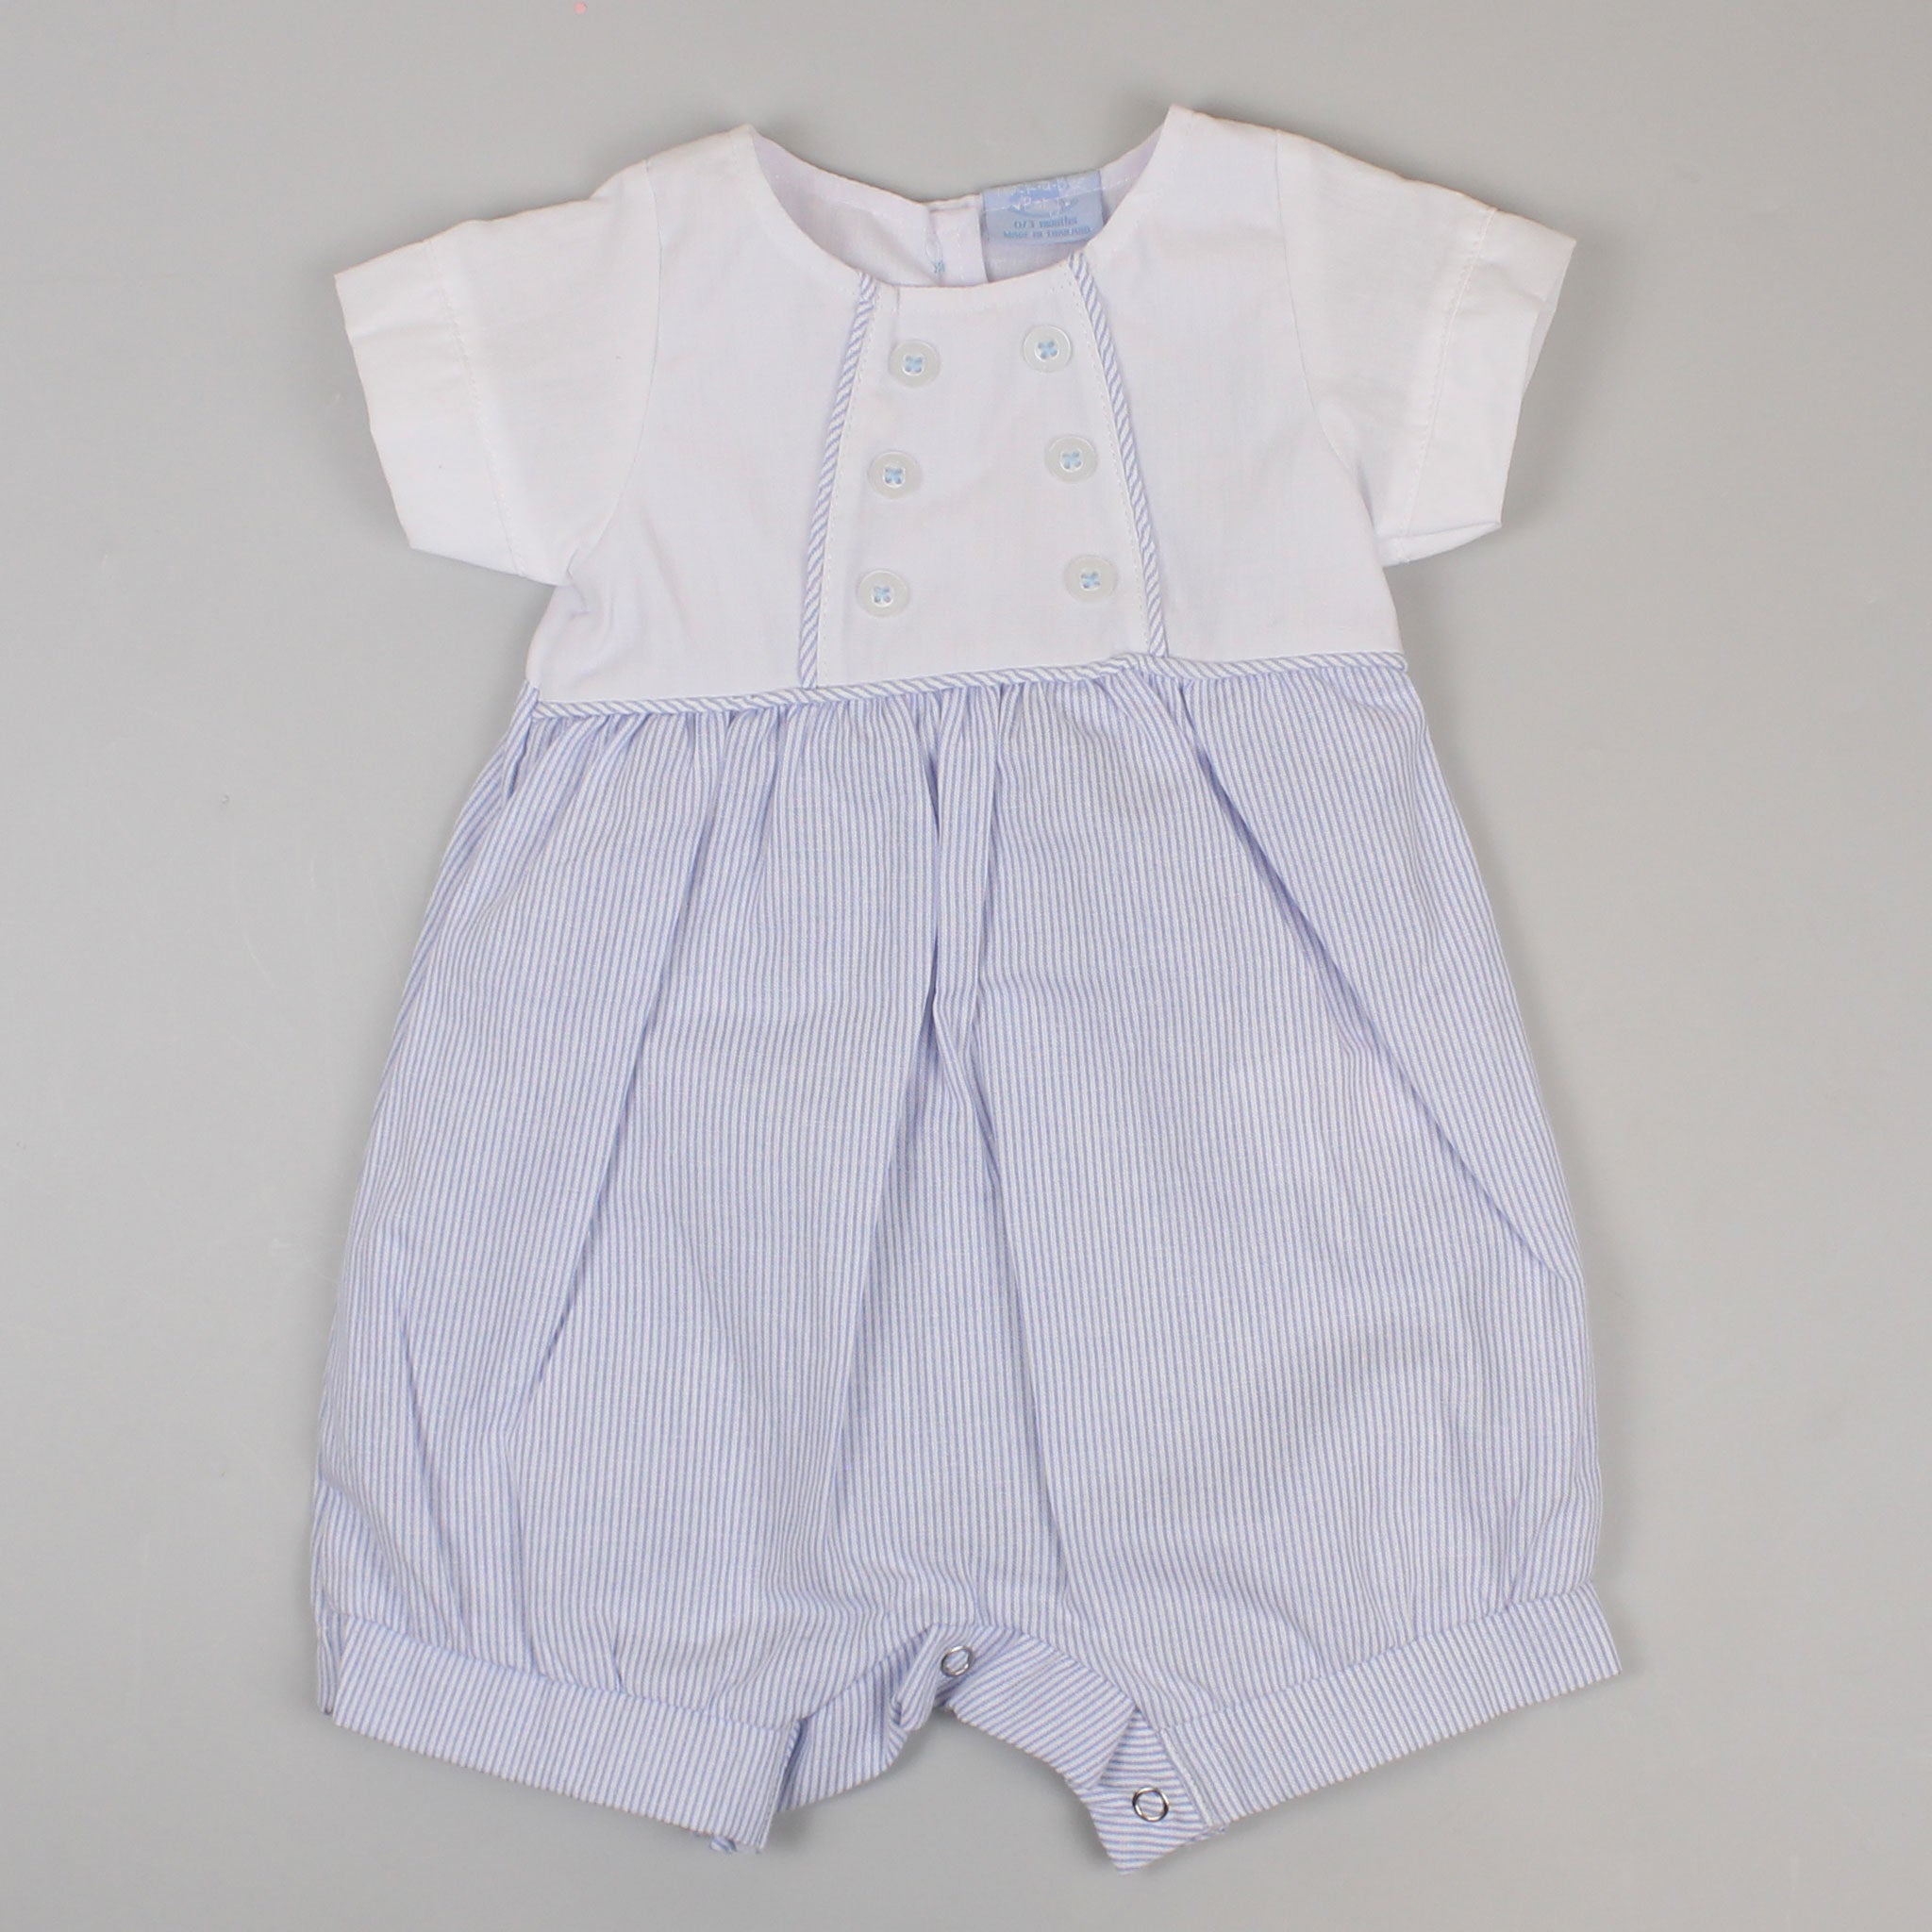 baby boys blue and white outfit with striped blue bottom